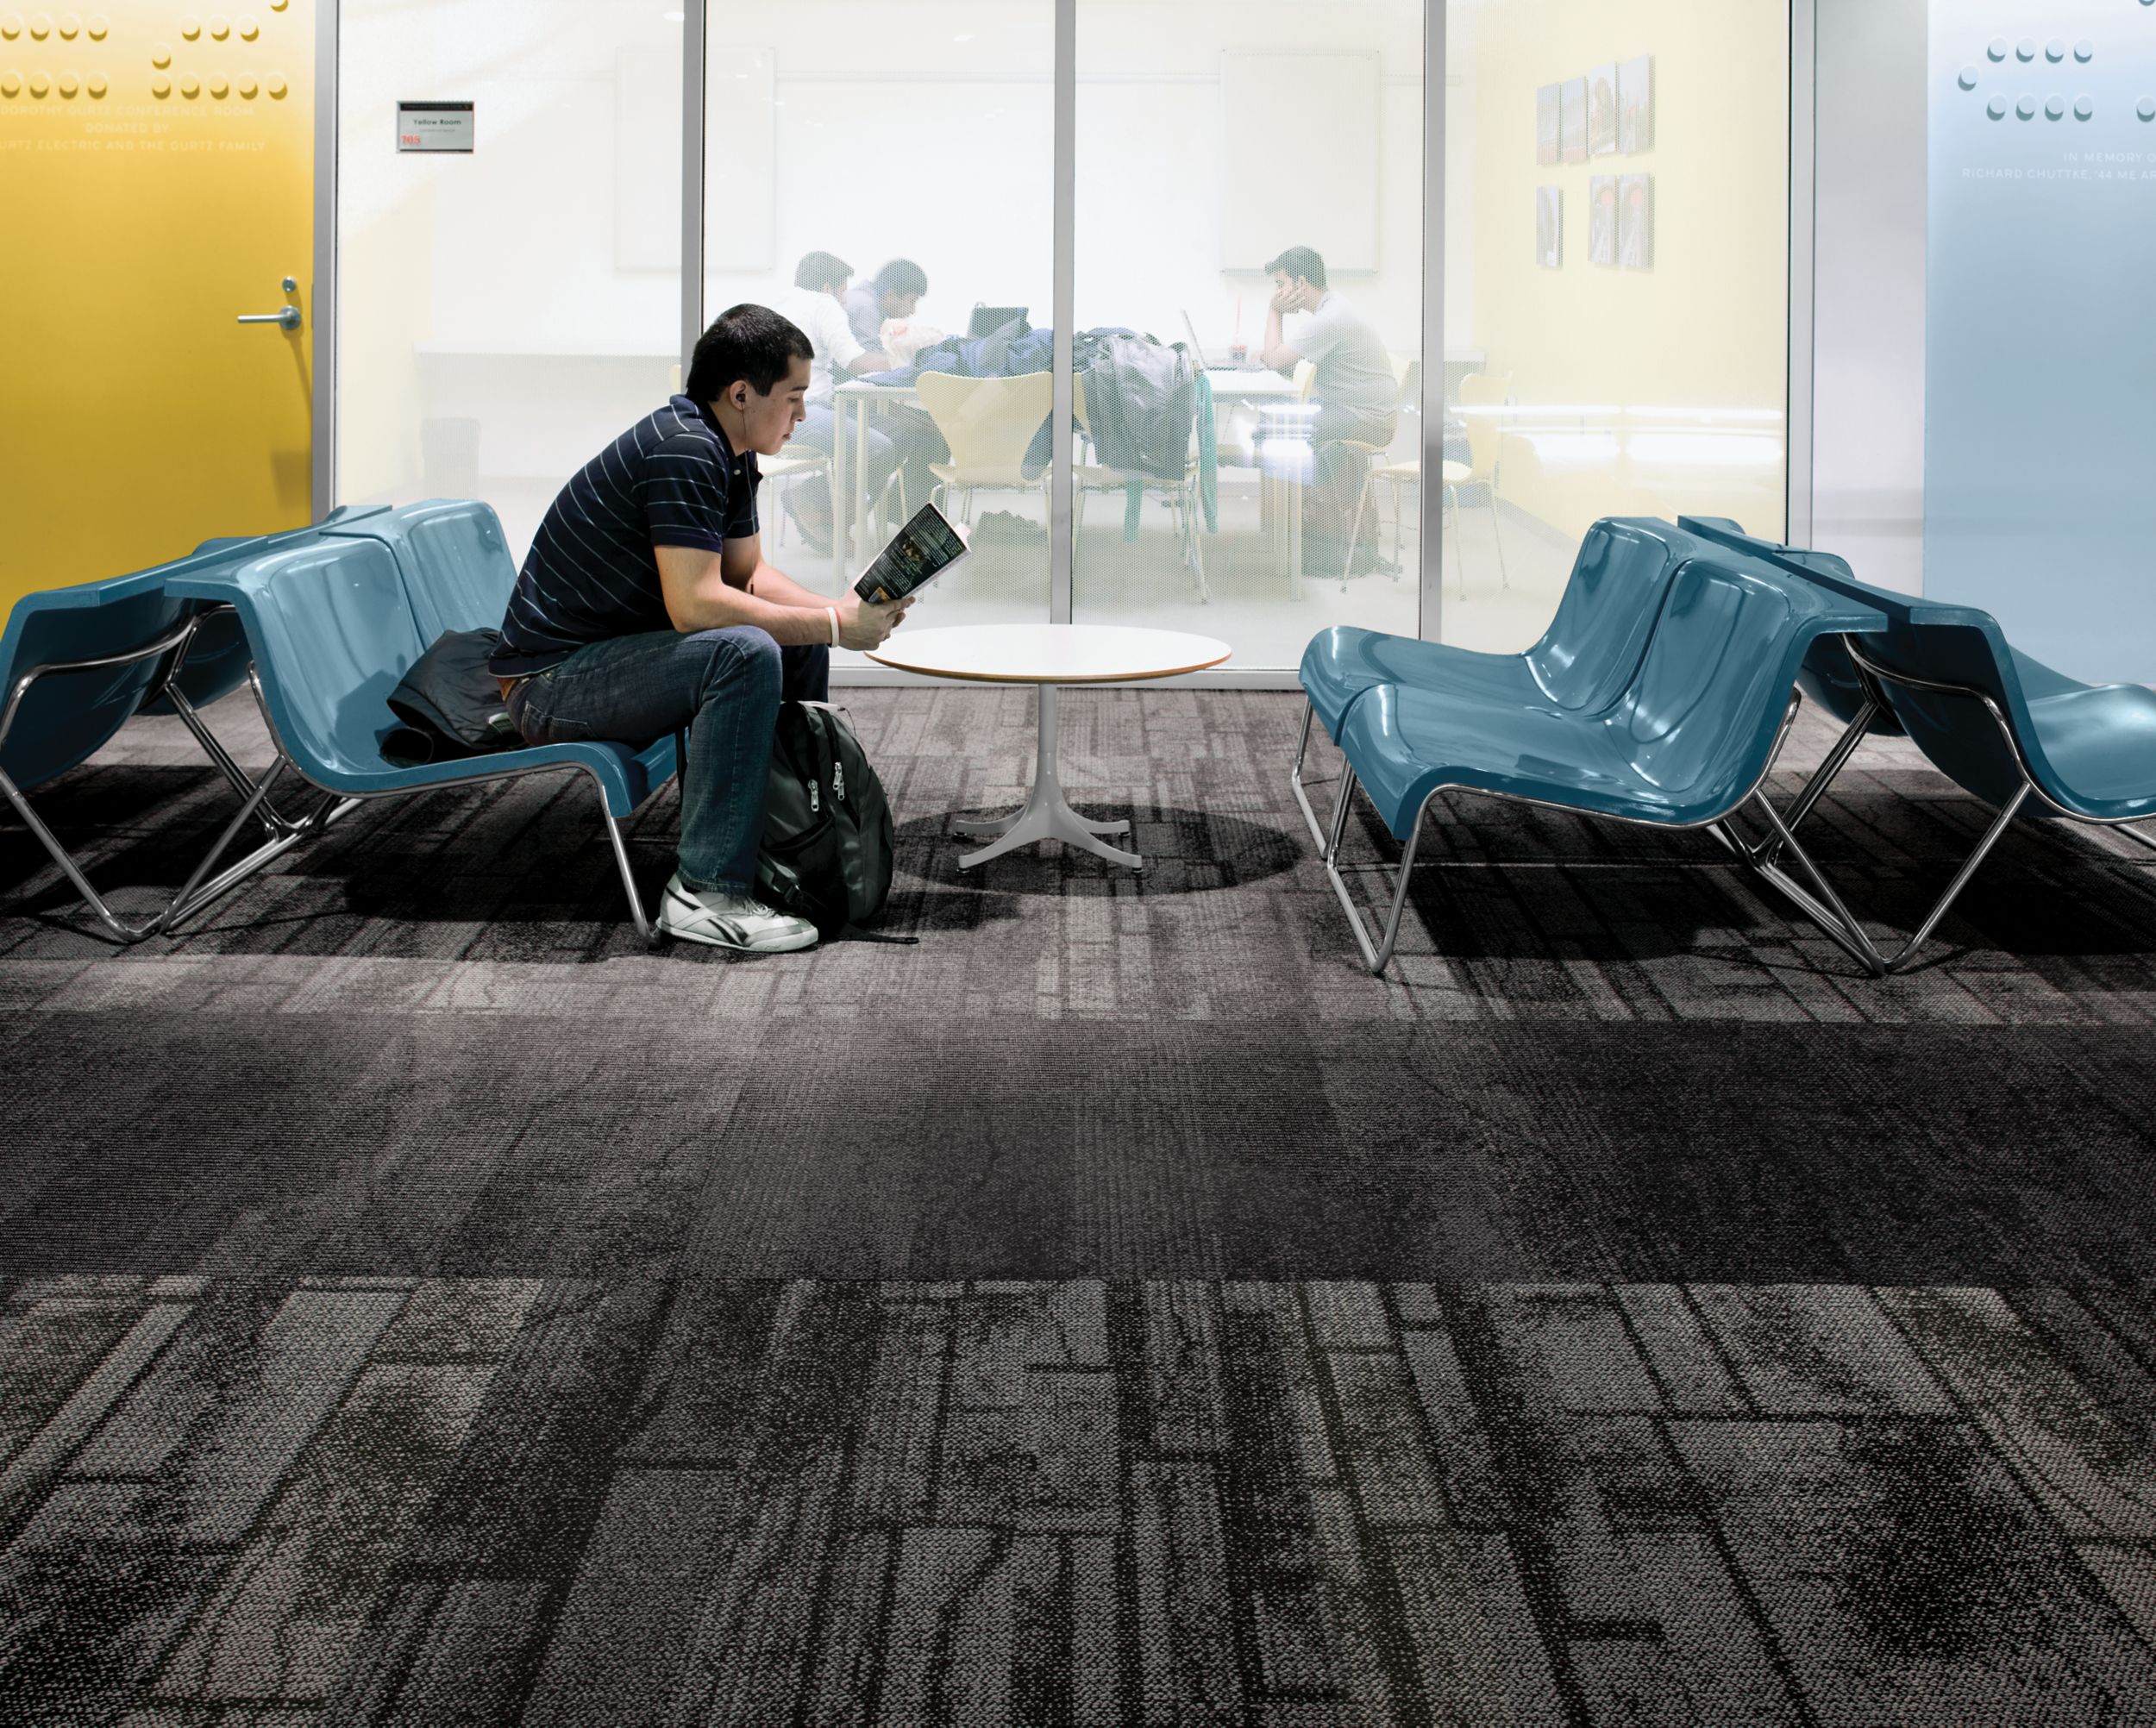 Interface Neighborhood Blocks and Neighborhood Smooth plank carpet tile in public education space with man reading a book on blue chair numéro d’image 10